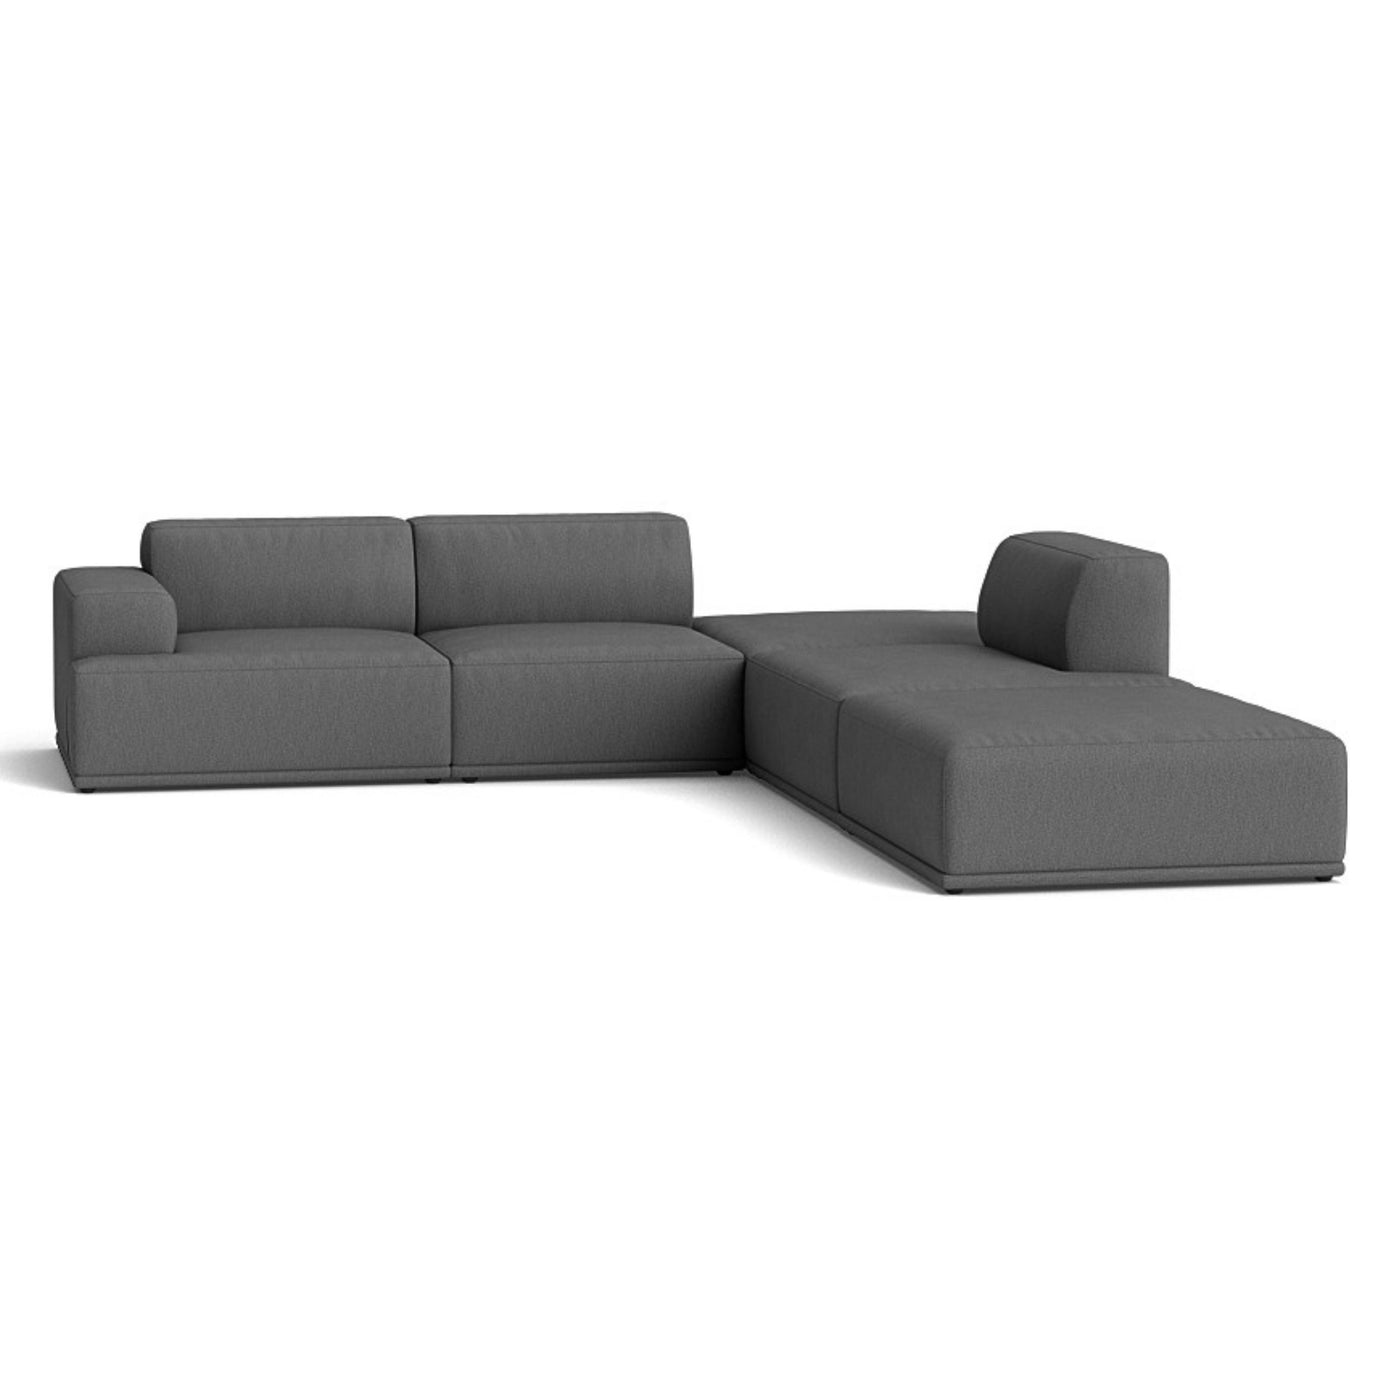 Muuto Connect Soft Modular Corner Sofa, configuration 3. made-to-order from someday designs. #colour_clay-13